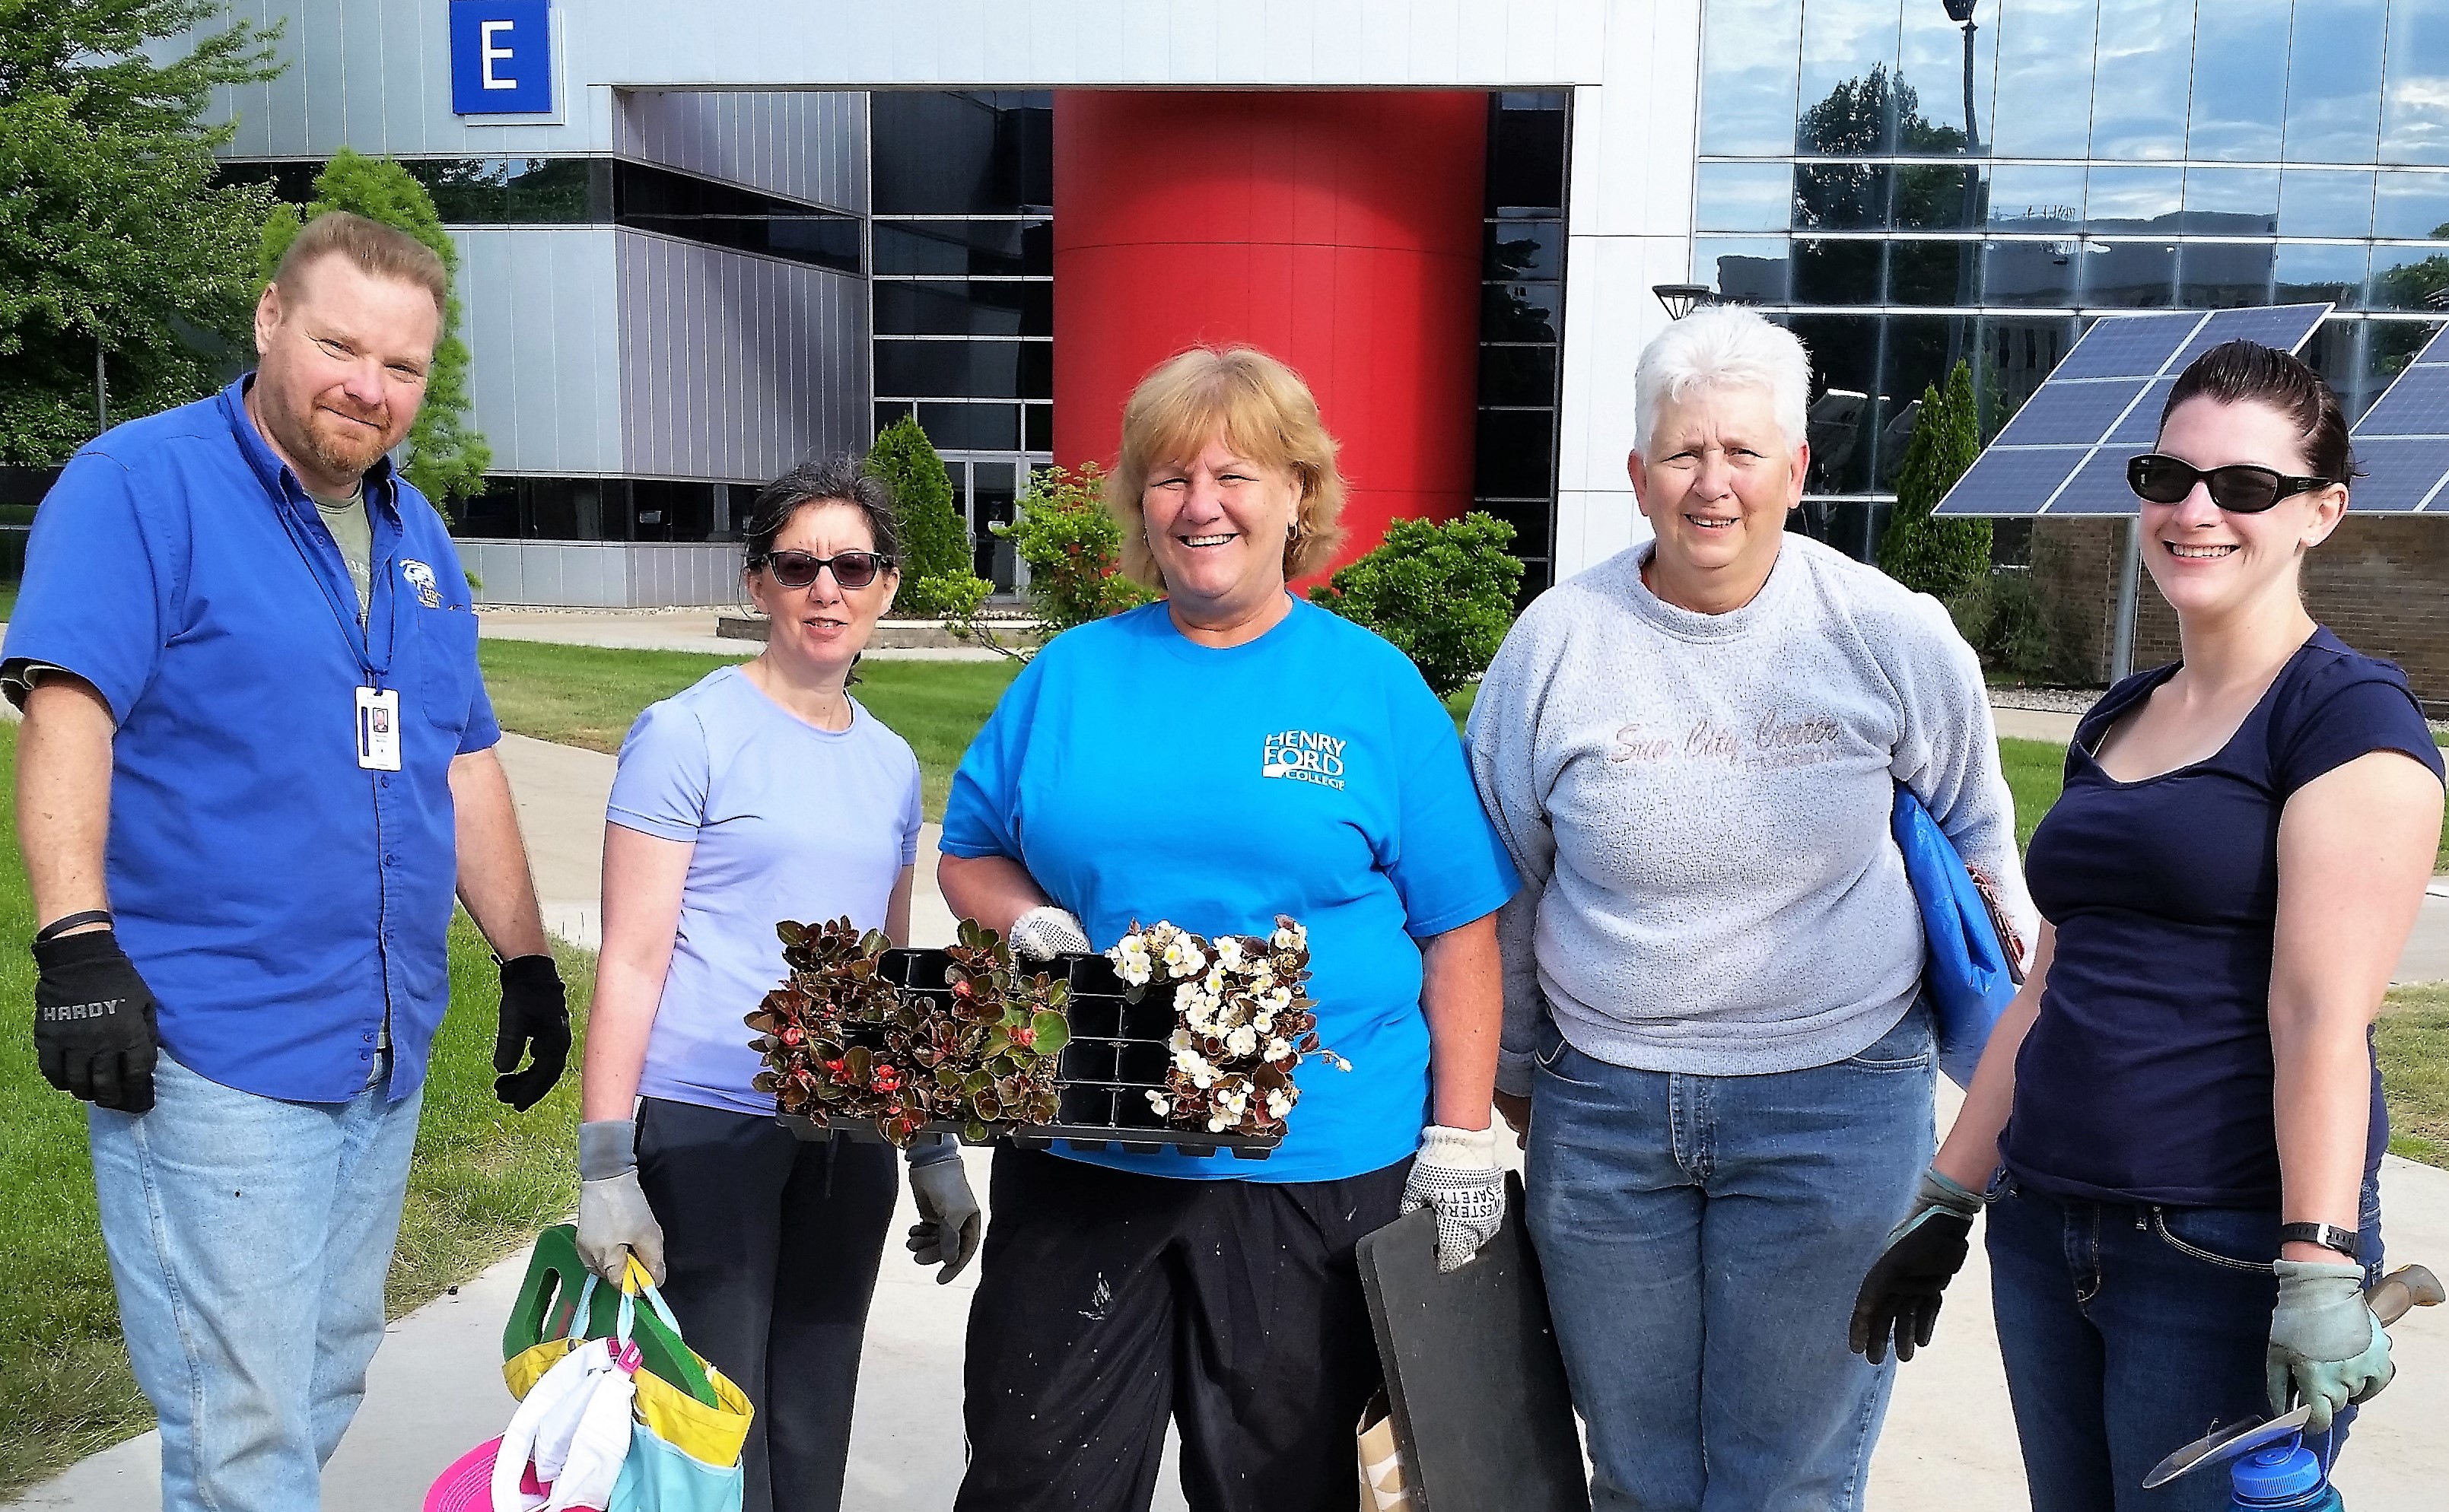 5 HFC employees dressed for gardening